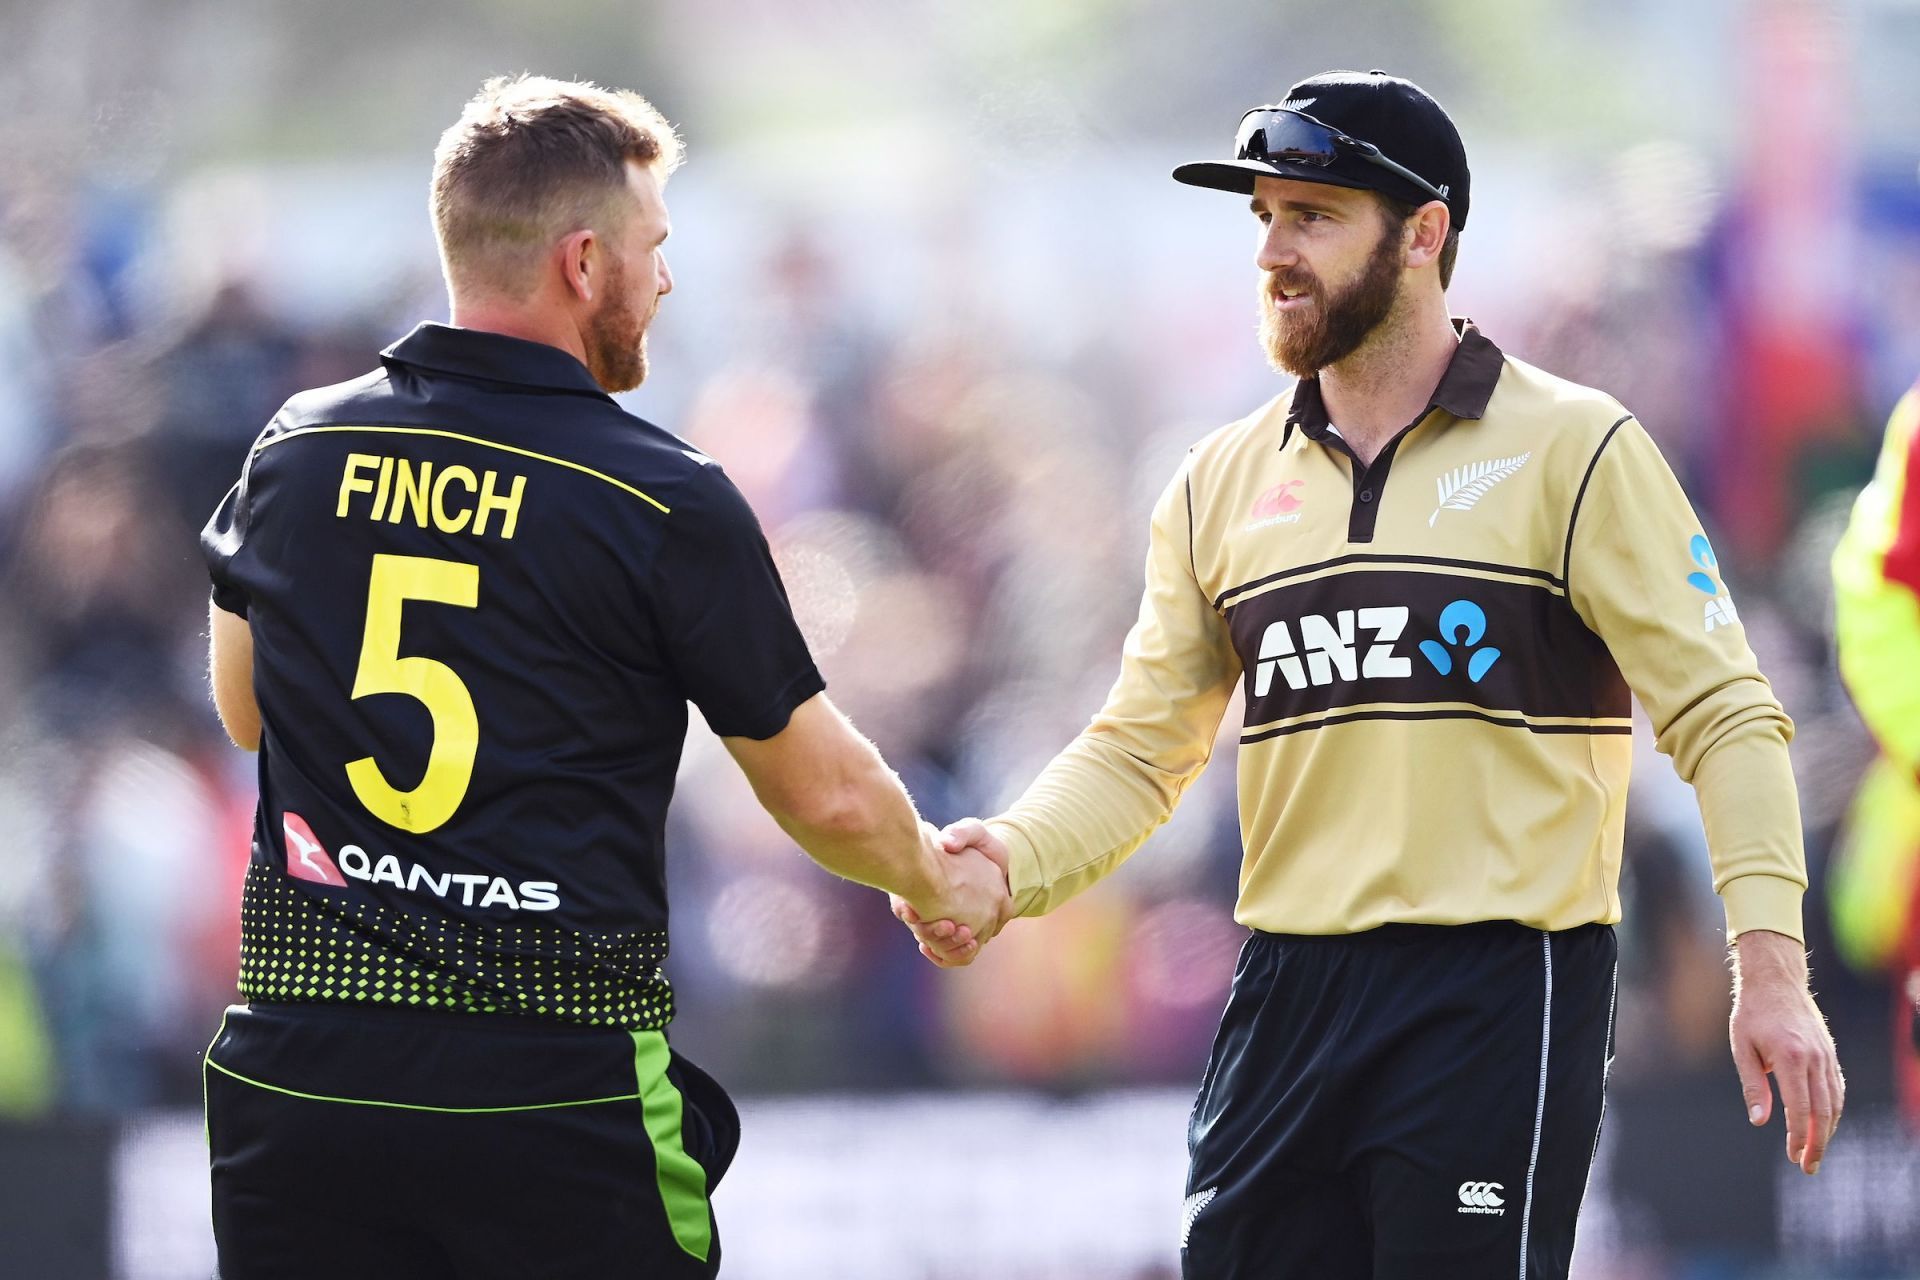 Aaron Finch and Kane Williamson. (Credits: Twitter)